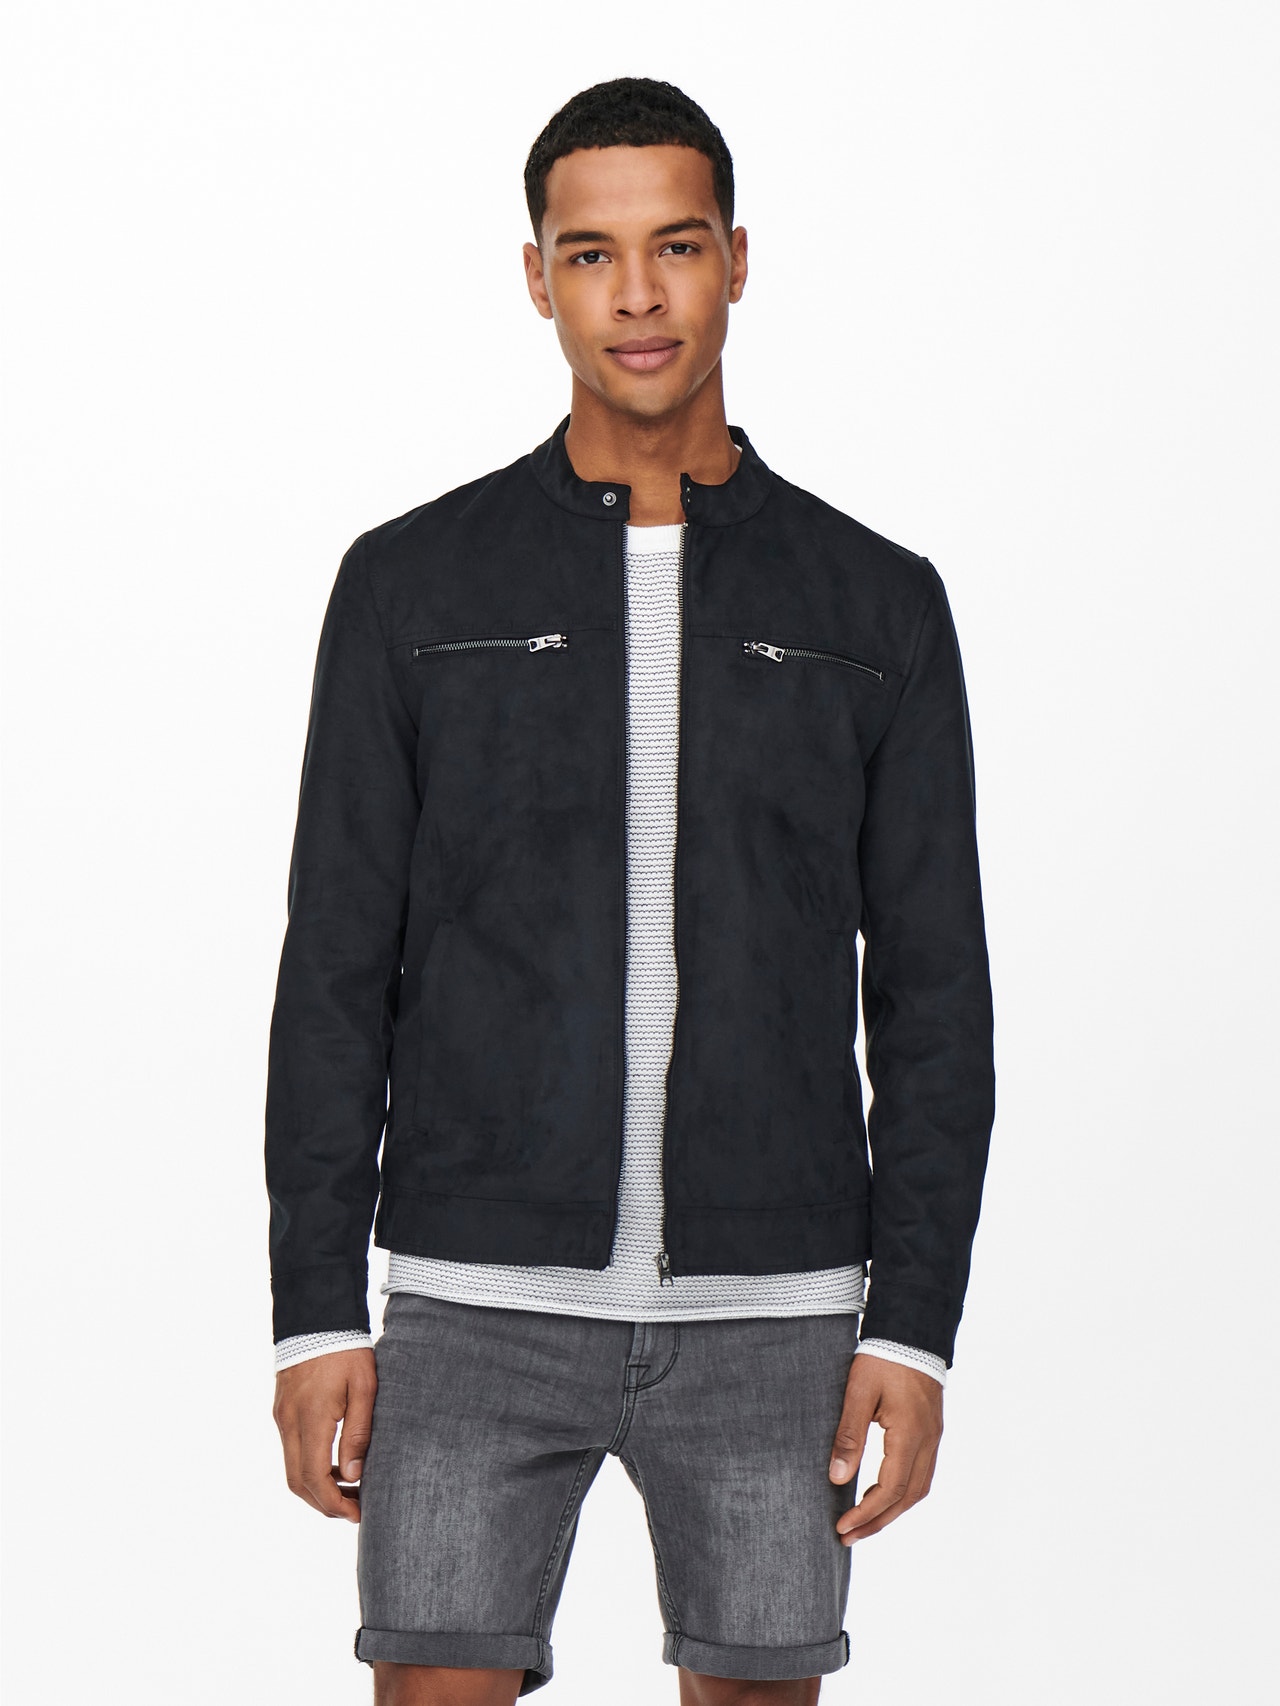 ONLY & SONS Jacket -Black - 22021446